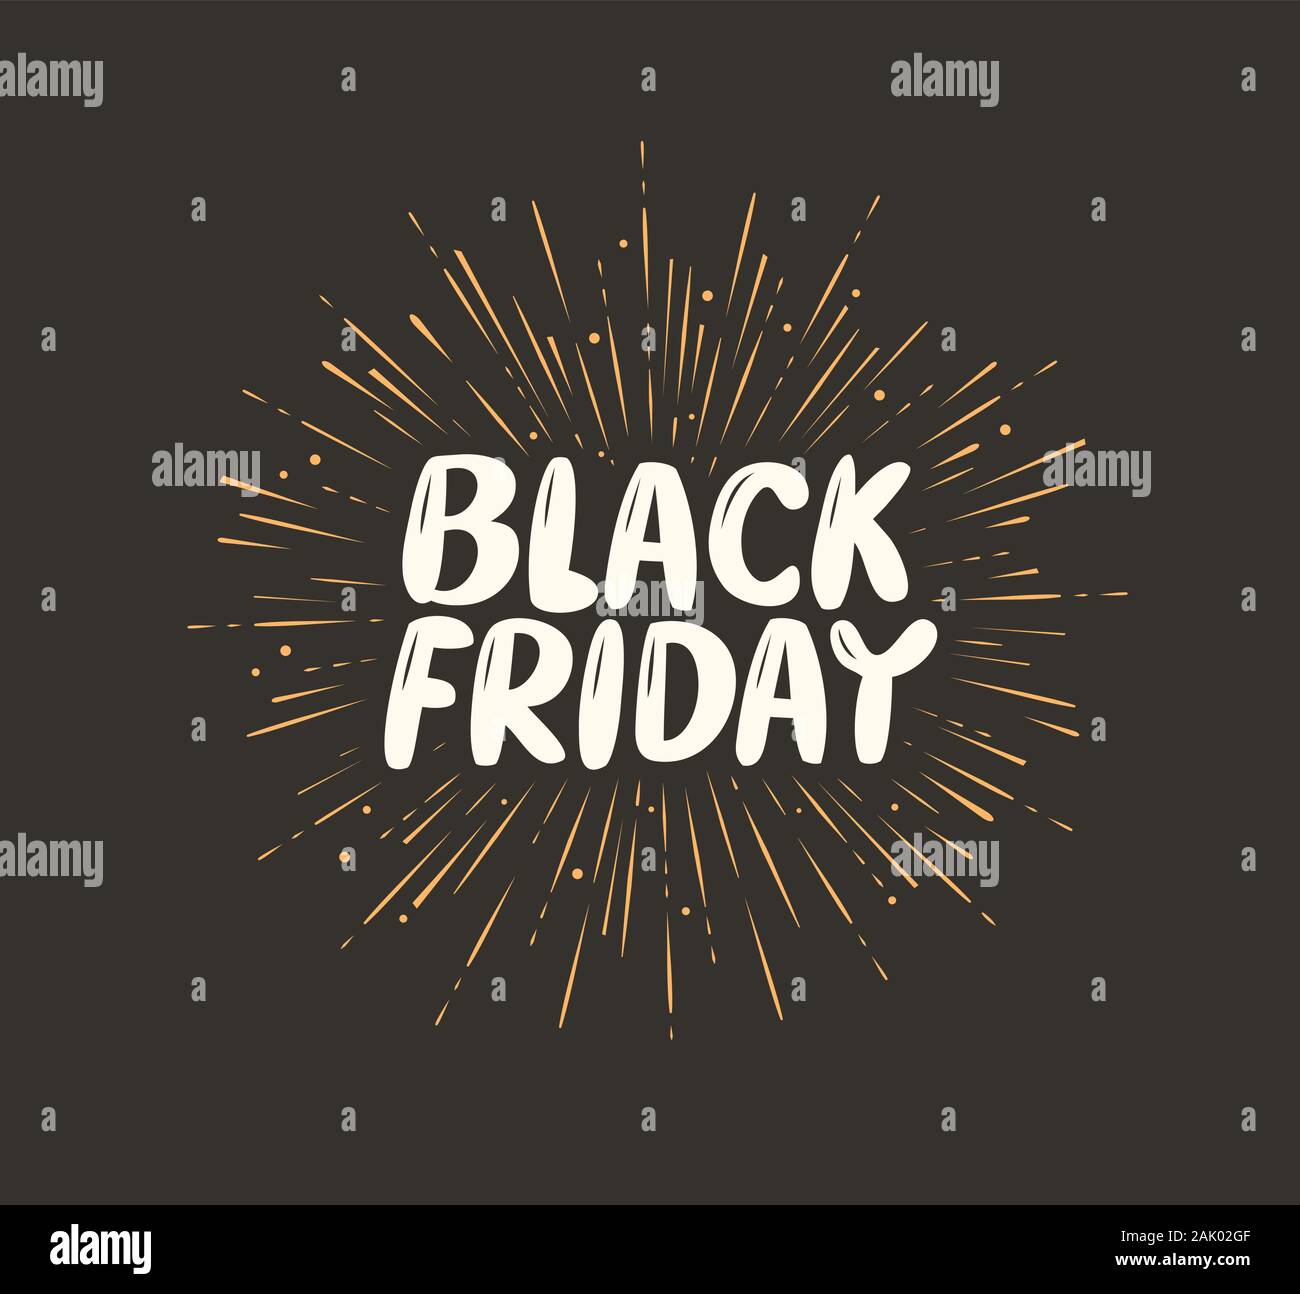 Black Friday. Sale, discount, low price, shopping label or icon. Vector illustration Stock Vector